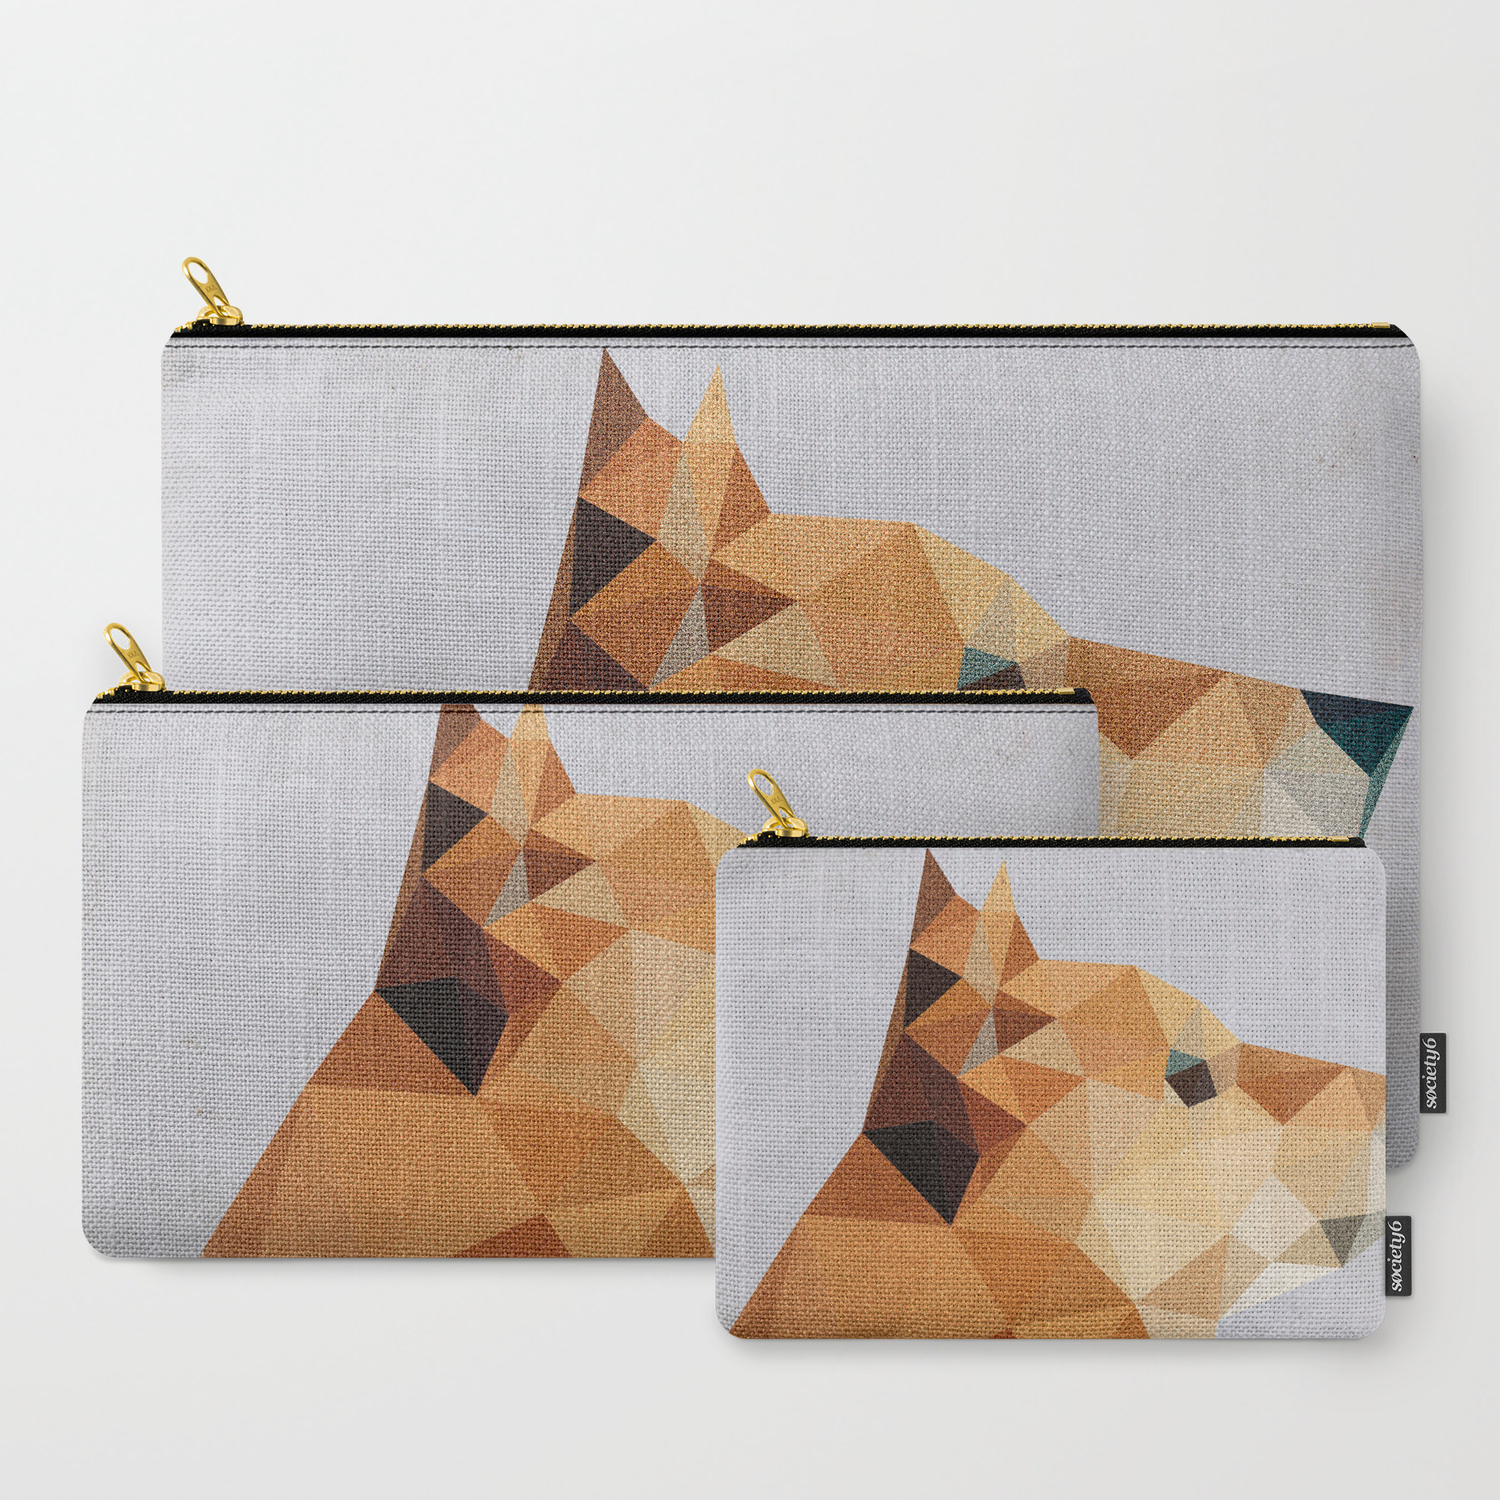 Origami Paper Pouch Geo Geometric Low Poly Triangles Vintage Dog Origami Paper Animal Carry All Pouch